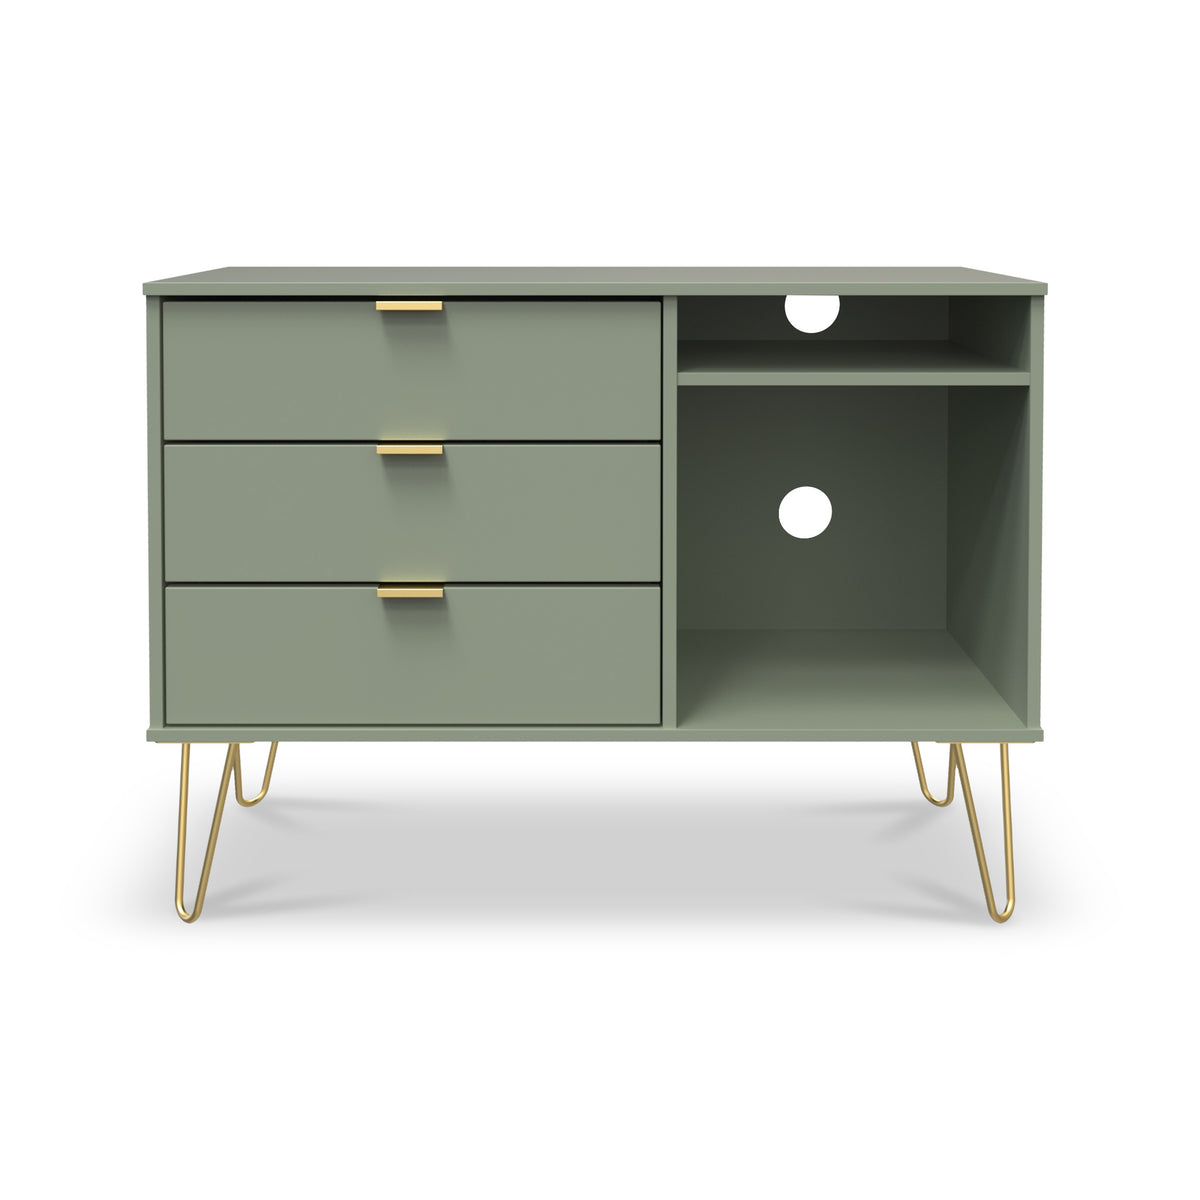 Moreno Olive 3 Drawer TV Unit with Gold Hairpin Legs from Roseland Furniture